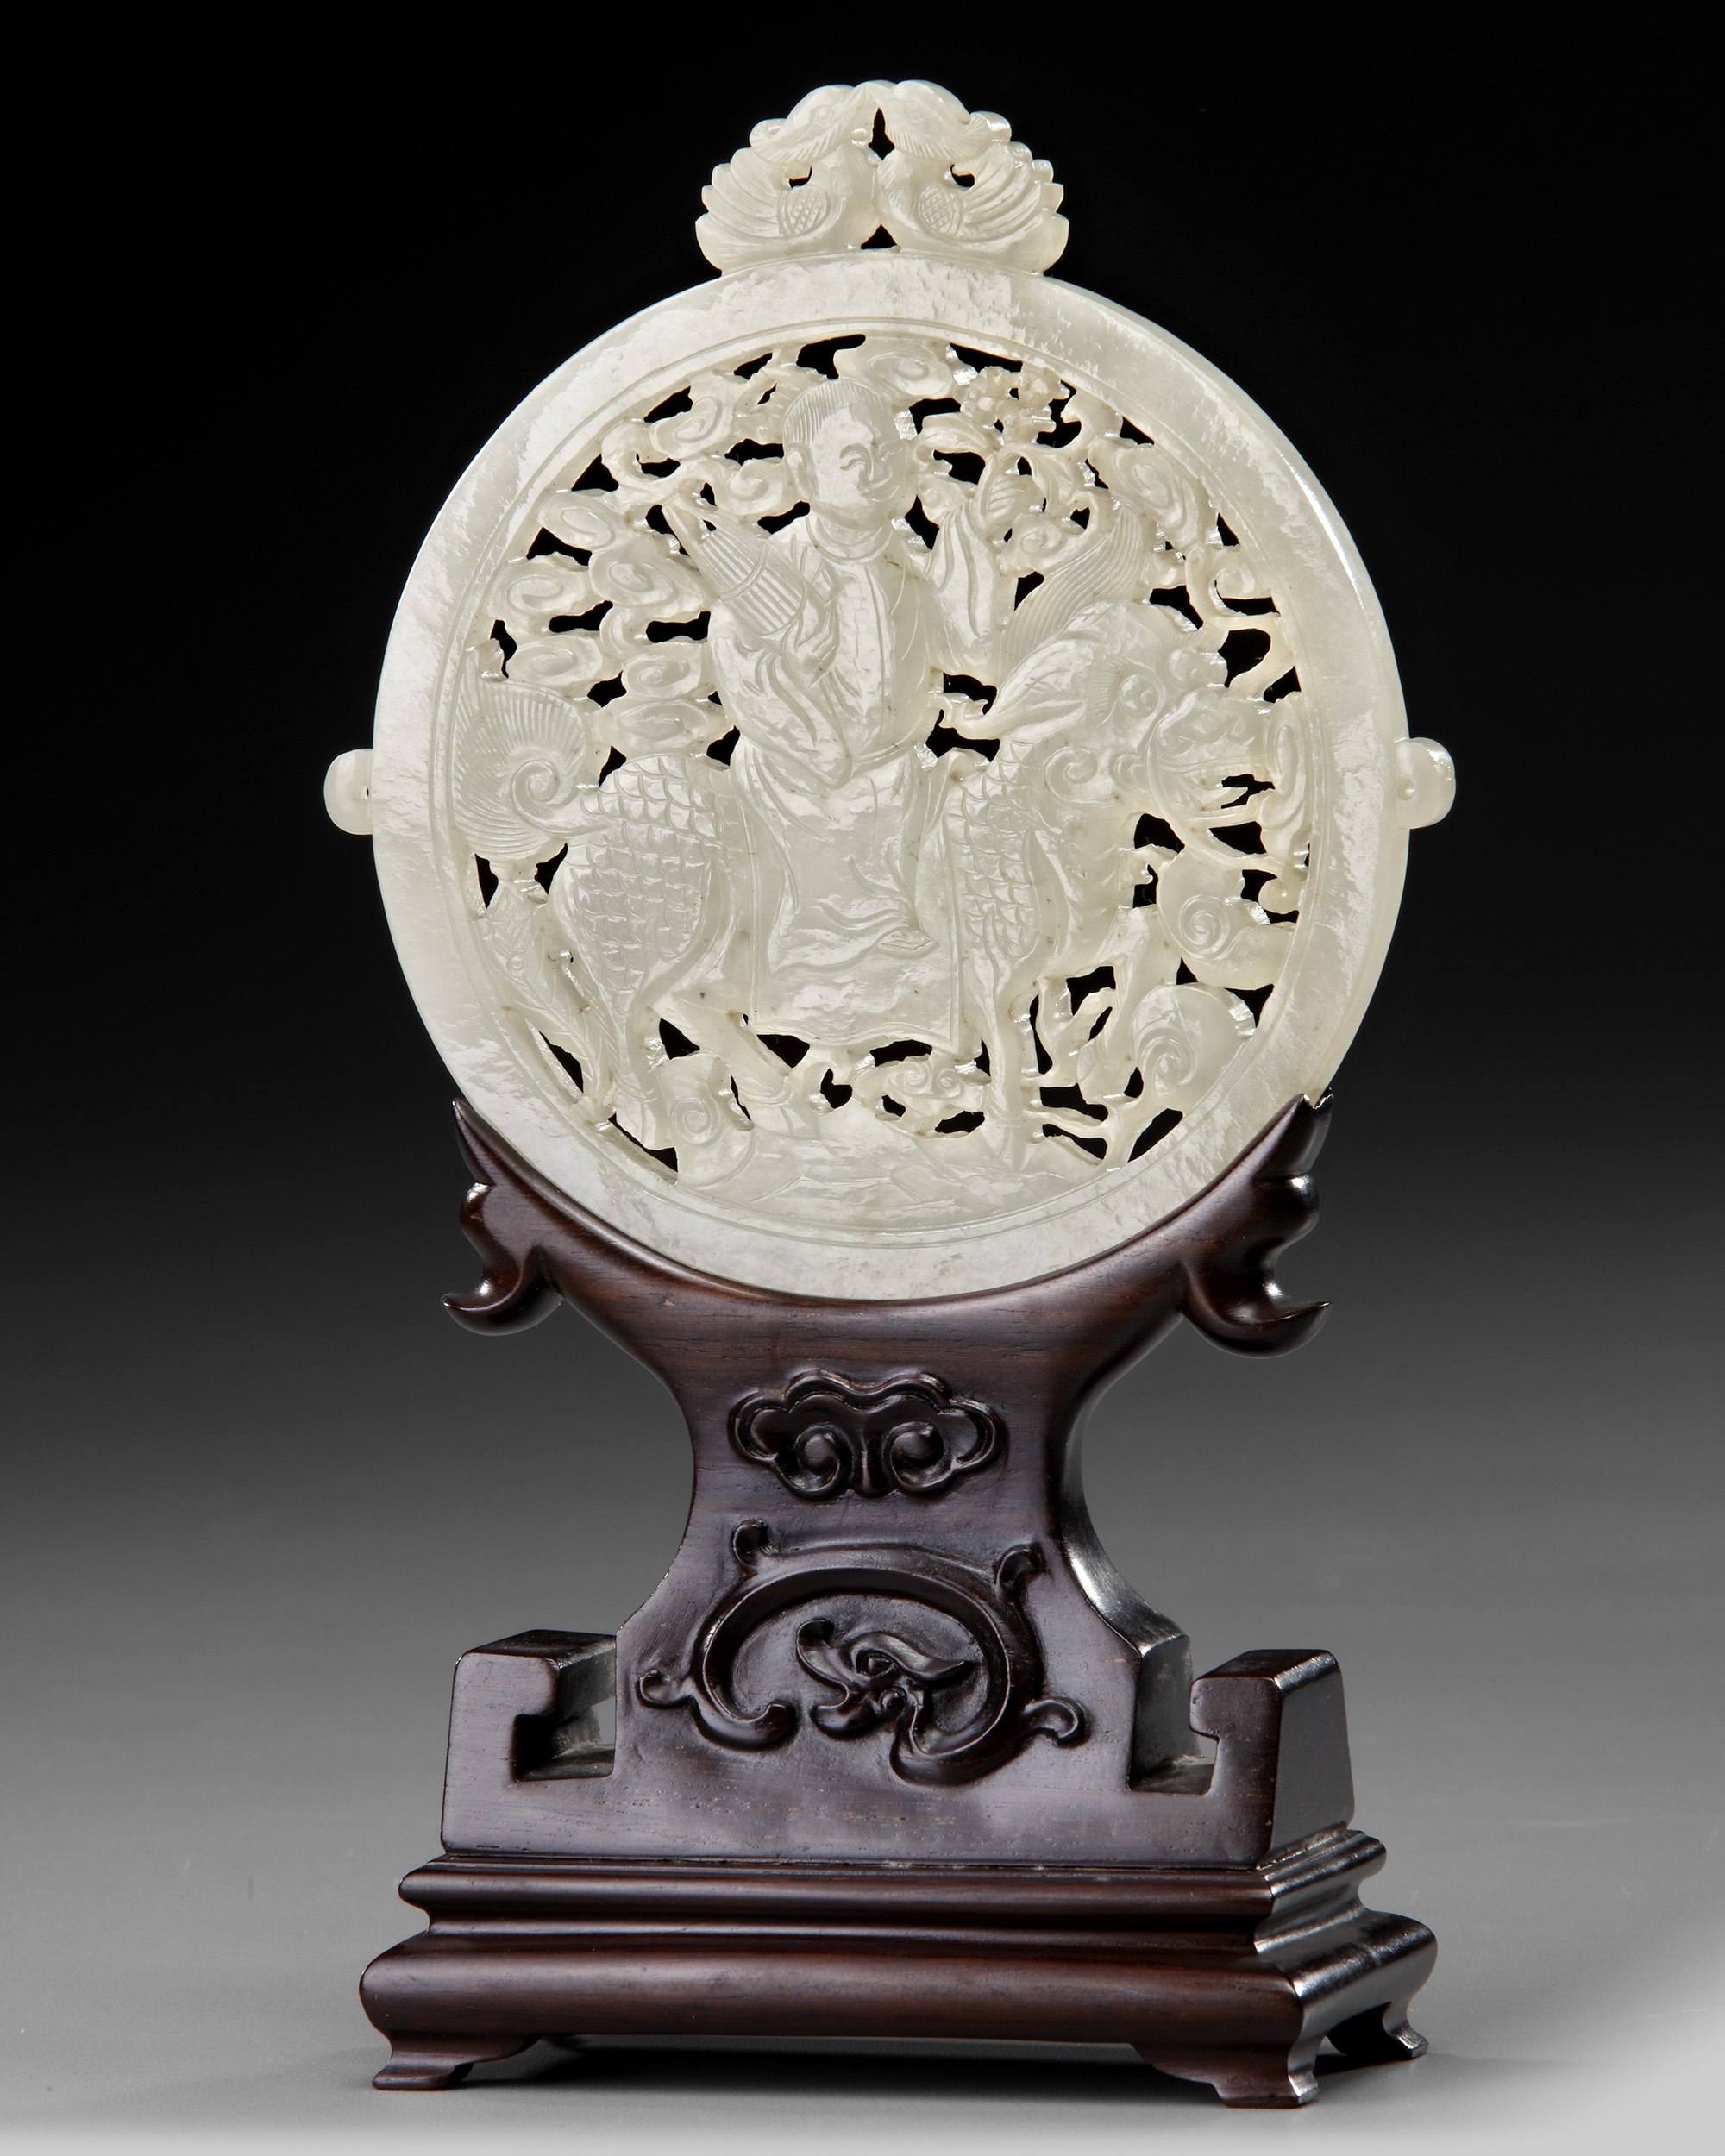 A CHINESE WHITE JADE ARCHAISTIC OPENWORK PLAQUE ON A WOODEN STAND, 19TH-20TH CENTURY - Image 2 of 4